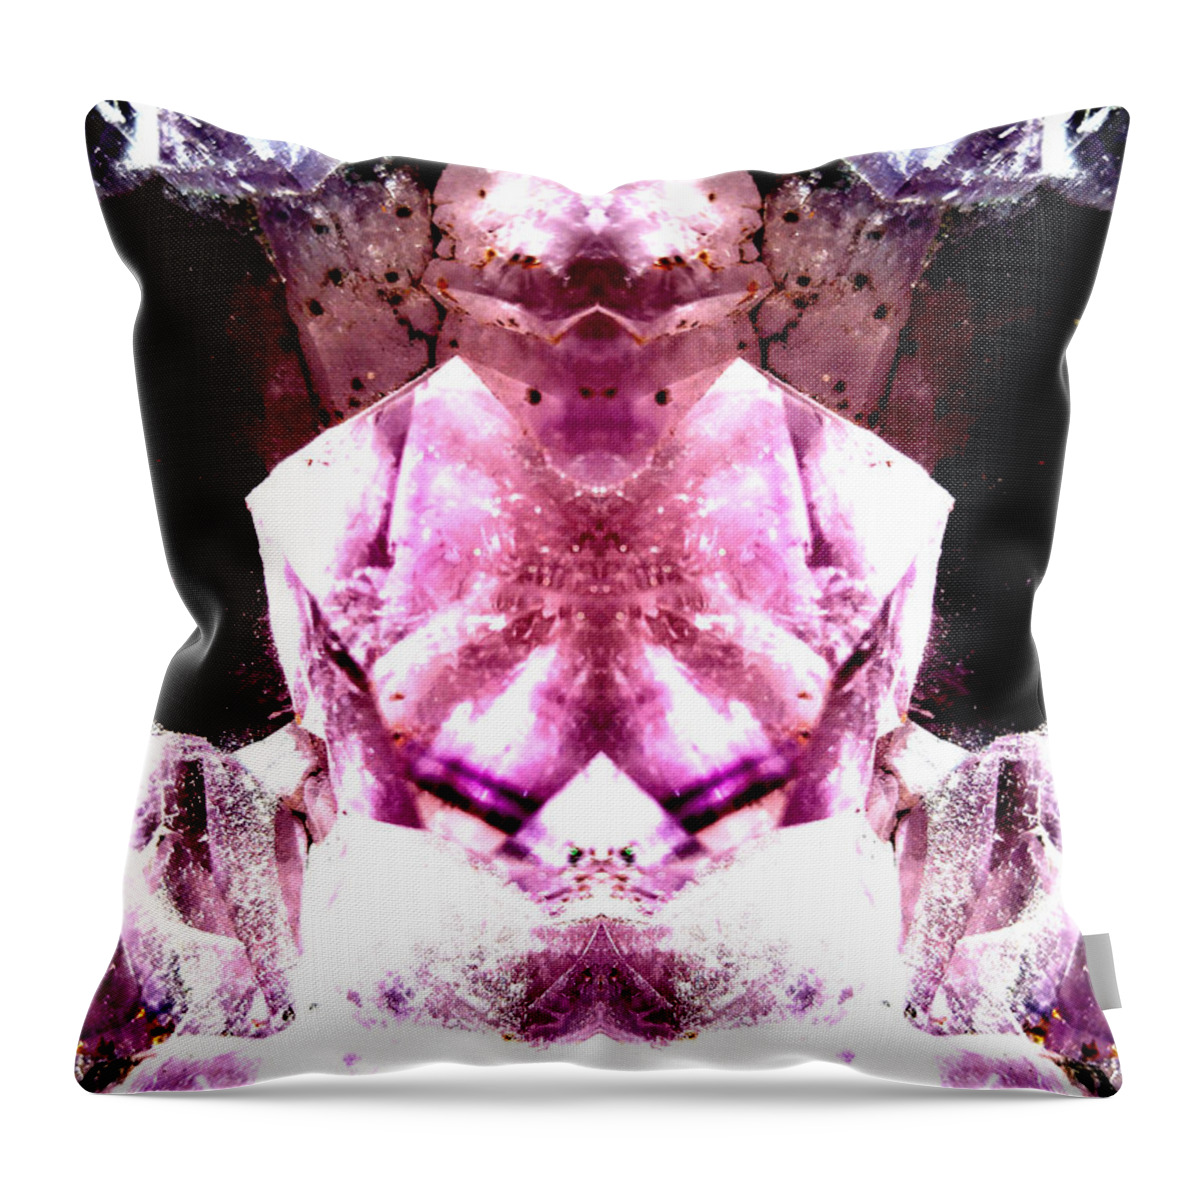 Abastract Throw Pillow featuring the painting Amethyst Awareness by Stephenie Zagorski